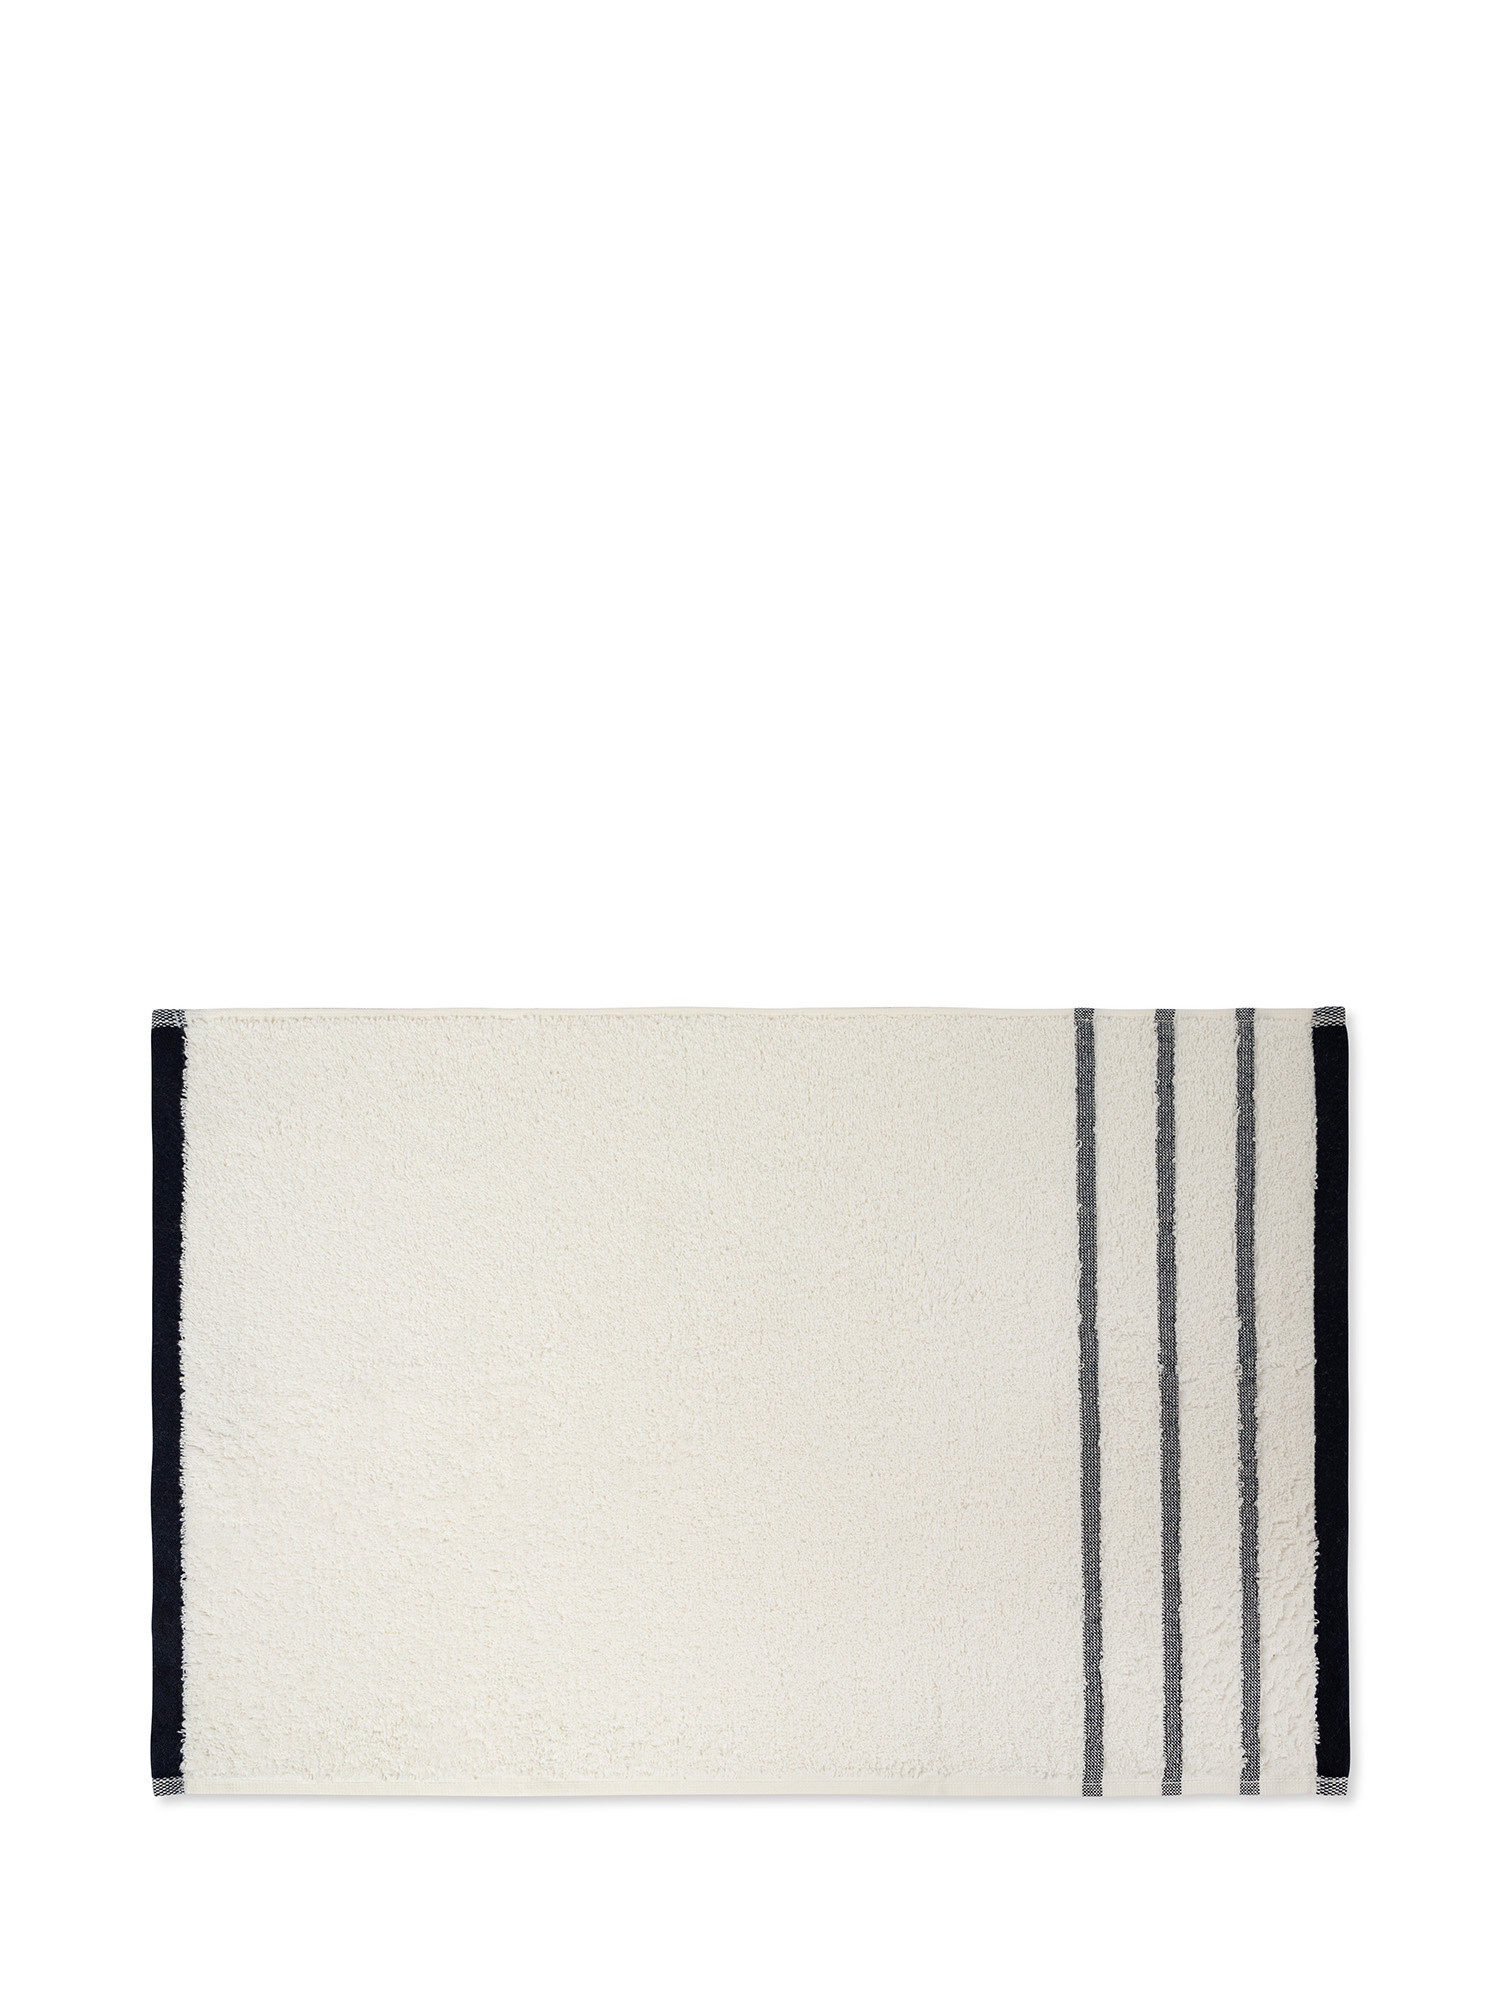 Cotton terry towel with nautical stripes motif, White, large image number 1